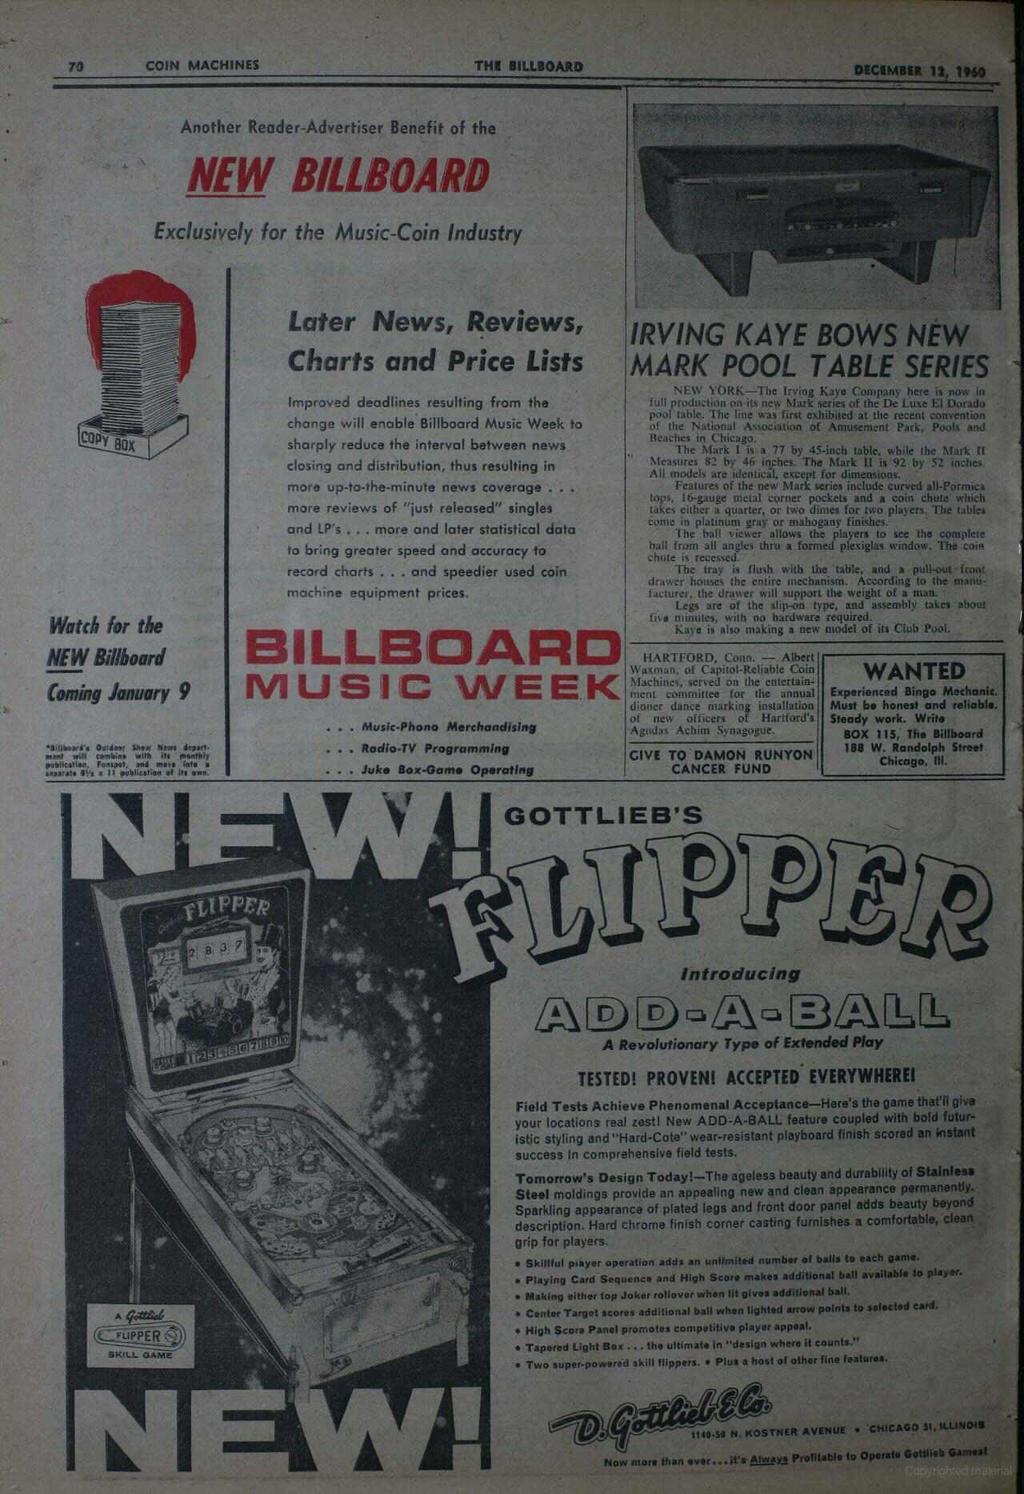 70 COIN MACHINES THI BILLBOARD DEC[MBER 12, 1960 Another Reader -Advertiser Benefit of the NEW BILLBOARD Exclusively for the Music -Coin Industry Batch for the NEW Billboard Coming January 9 'allwa.